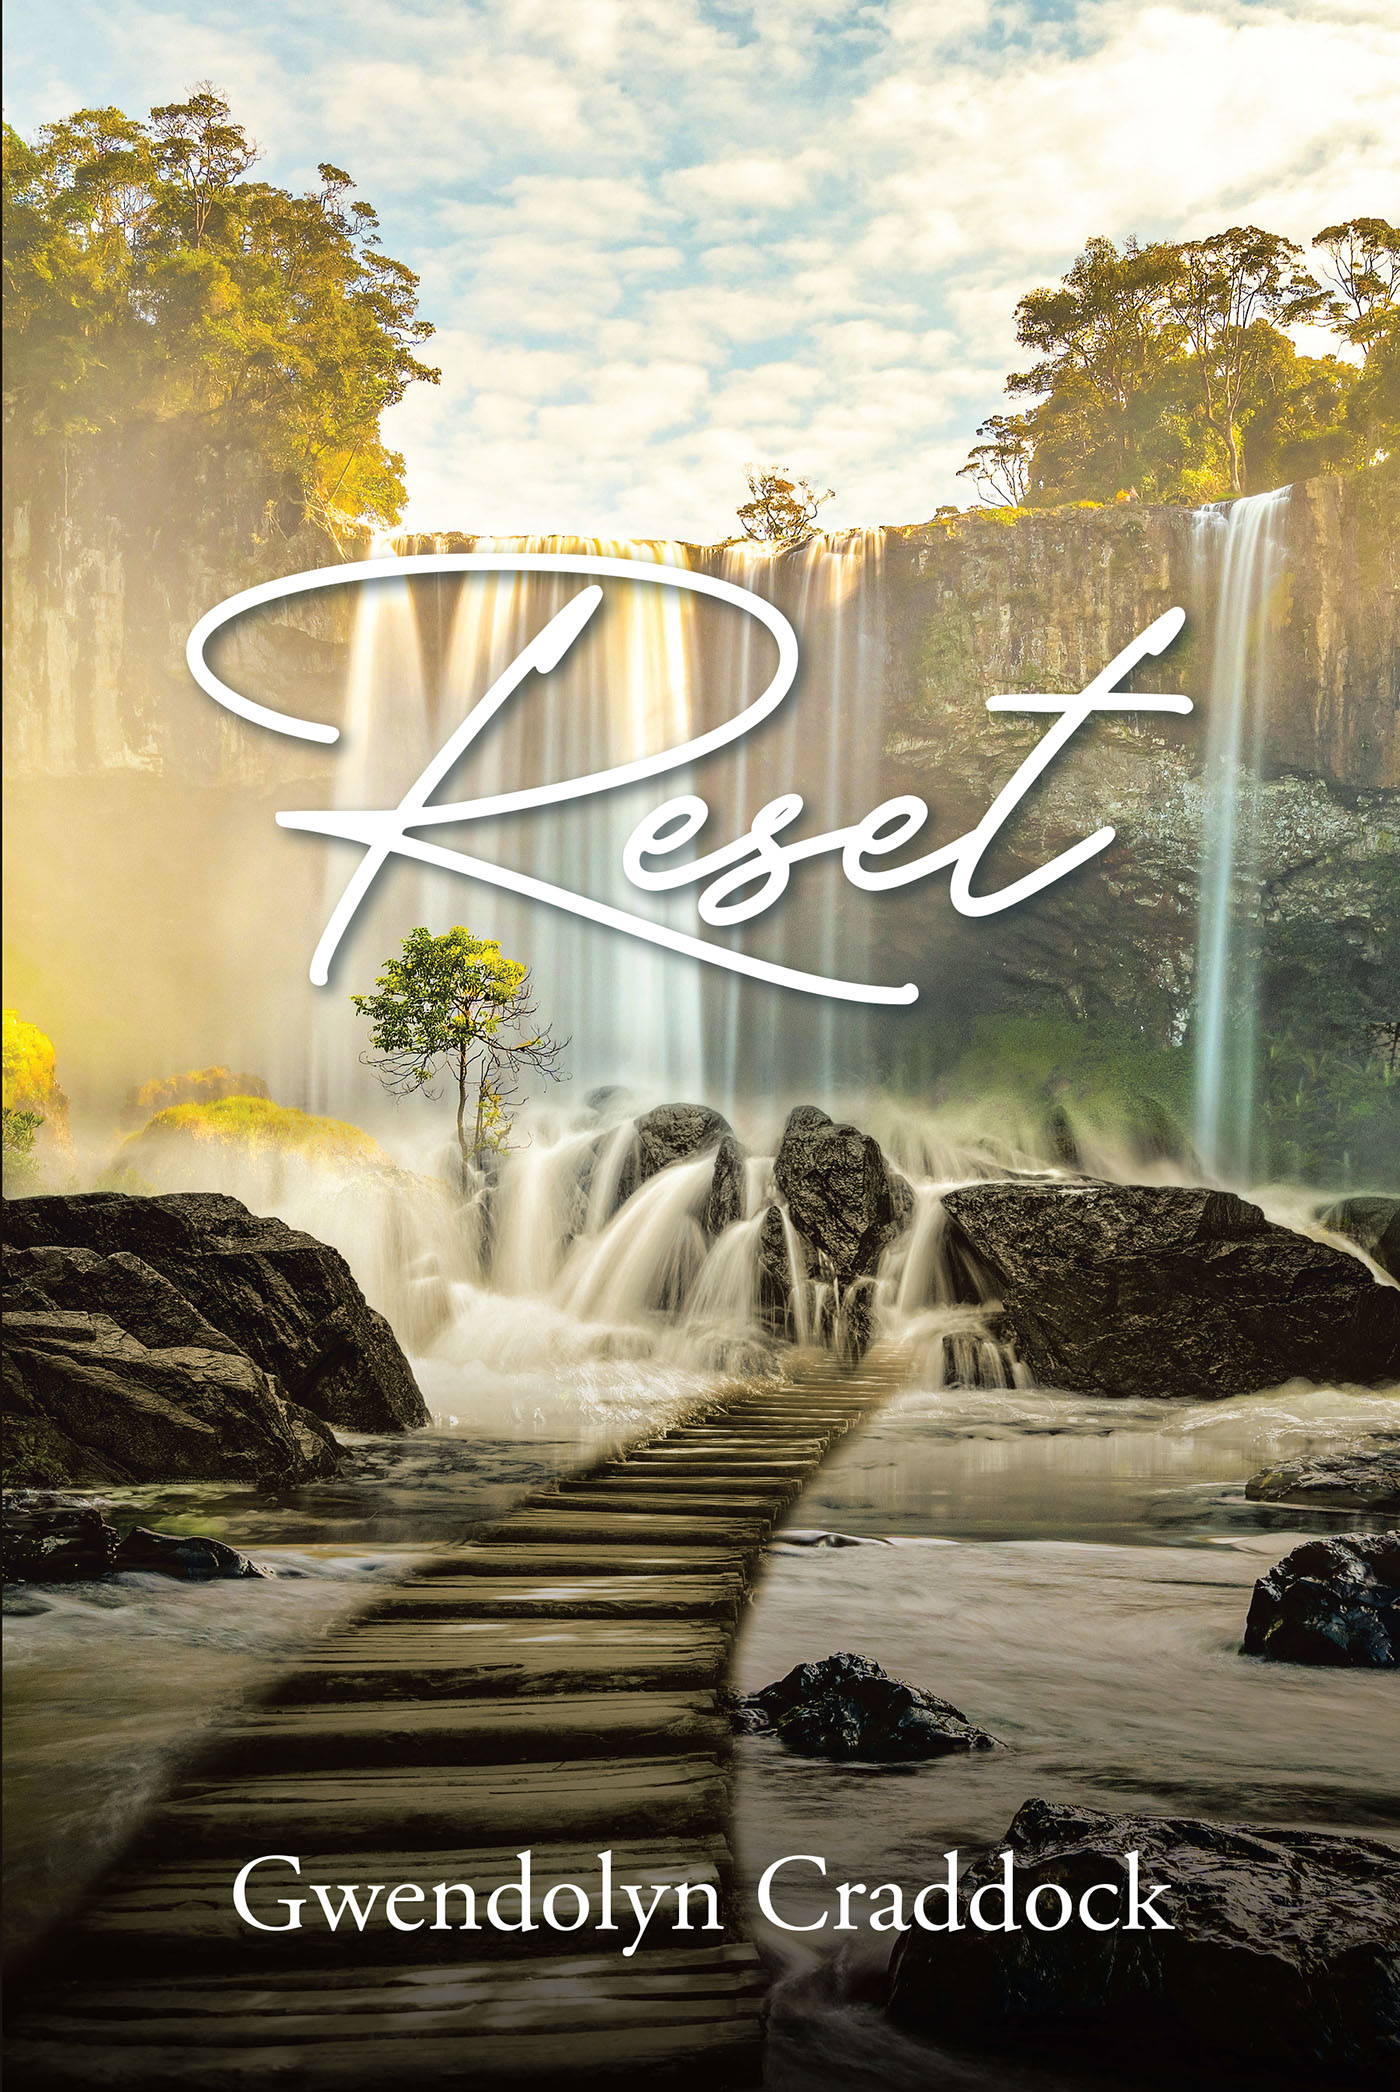 Gwendolyn Craddock’s Newly Released "Reset" is an Encouraging Message of God’s Guiding Hand in Times of Uncertainty